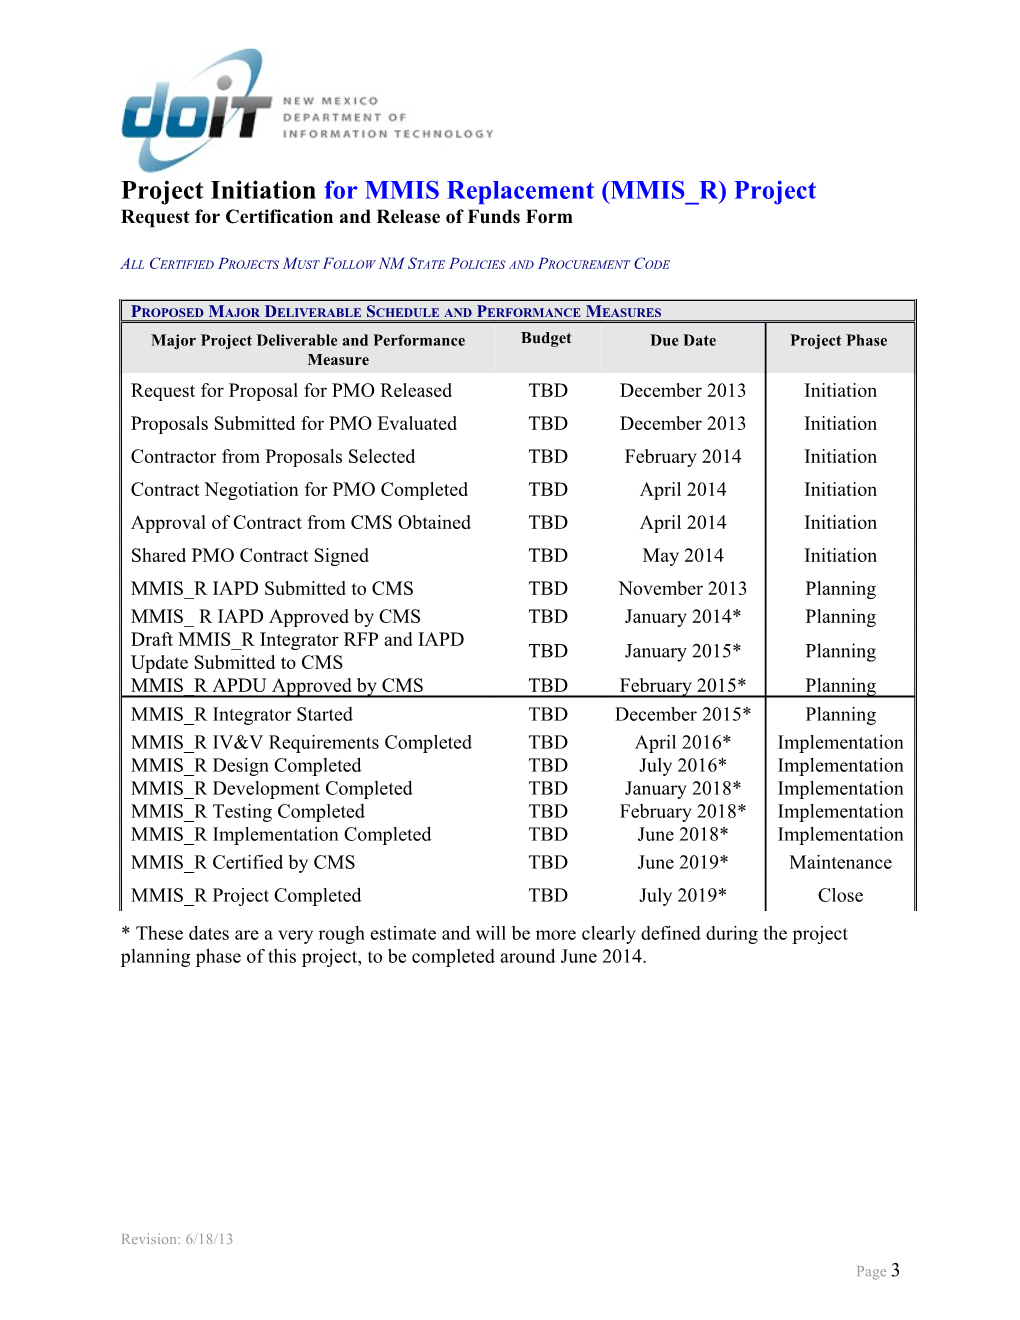 Project Initiationfor MMIS Replacement (MMIS R) Project